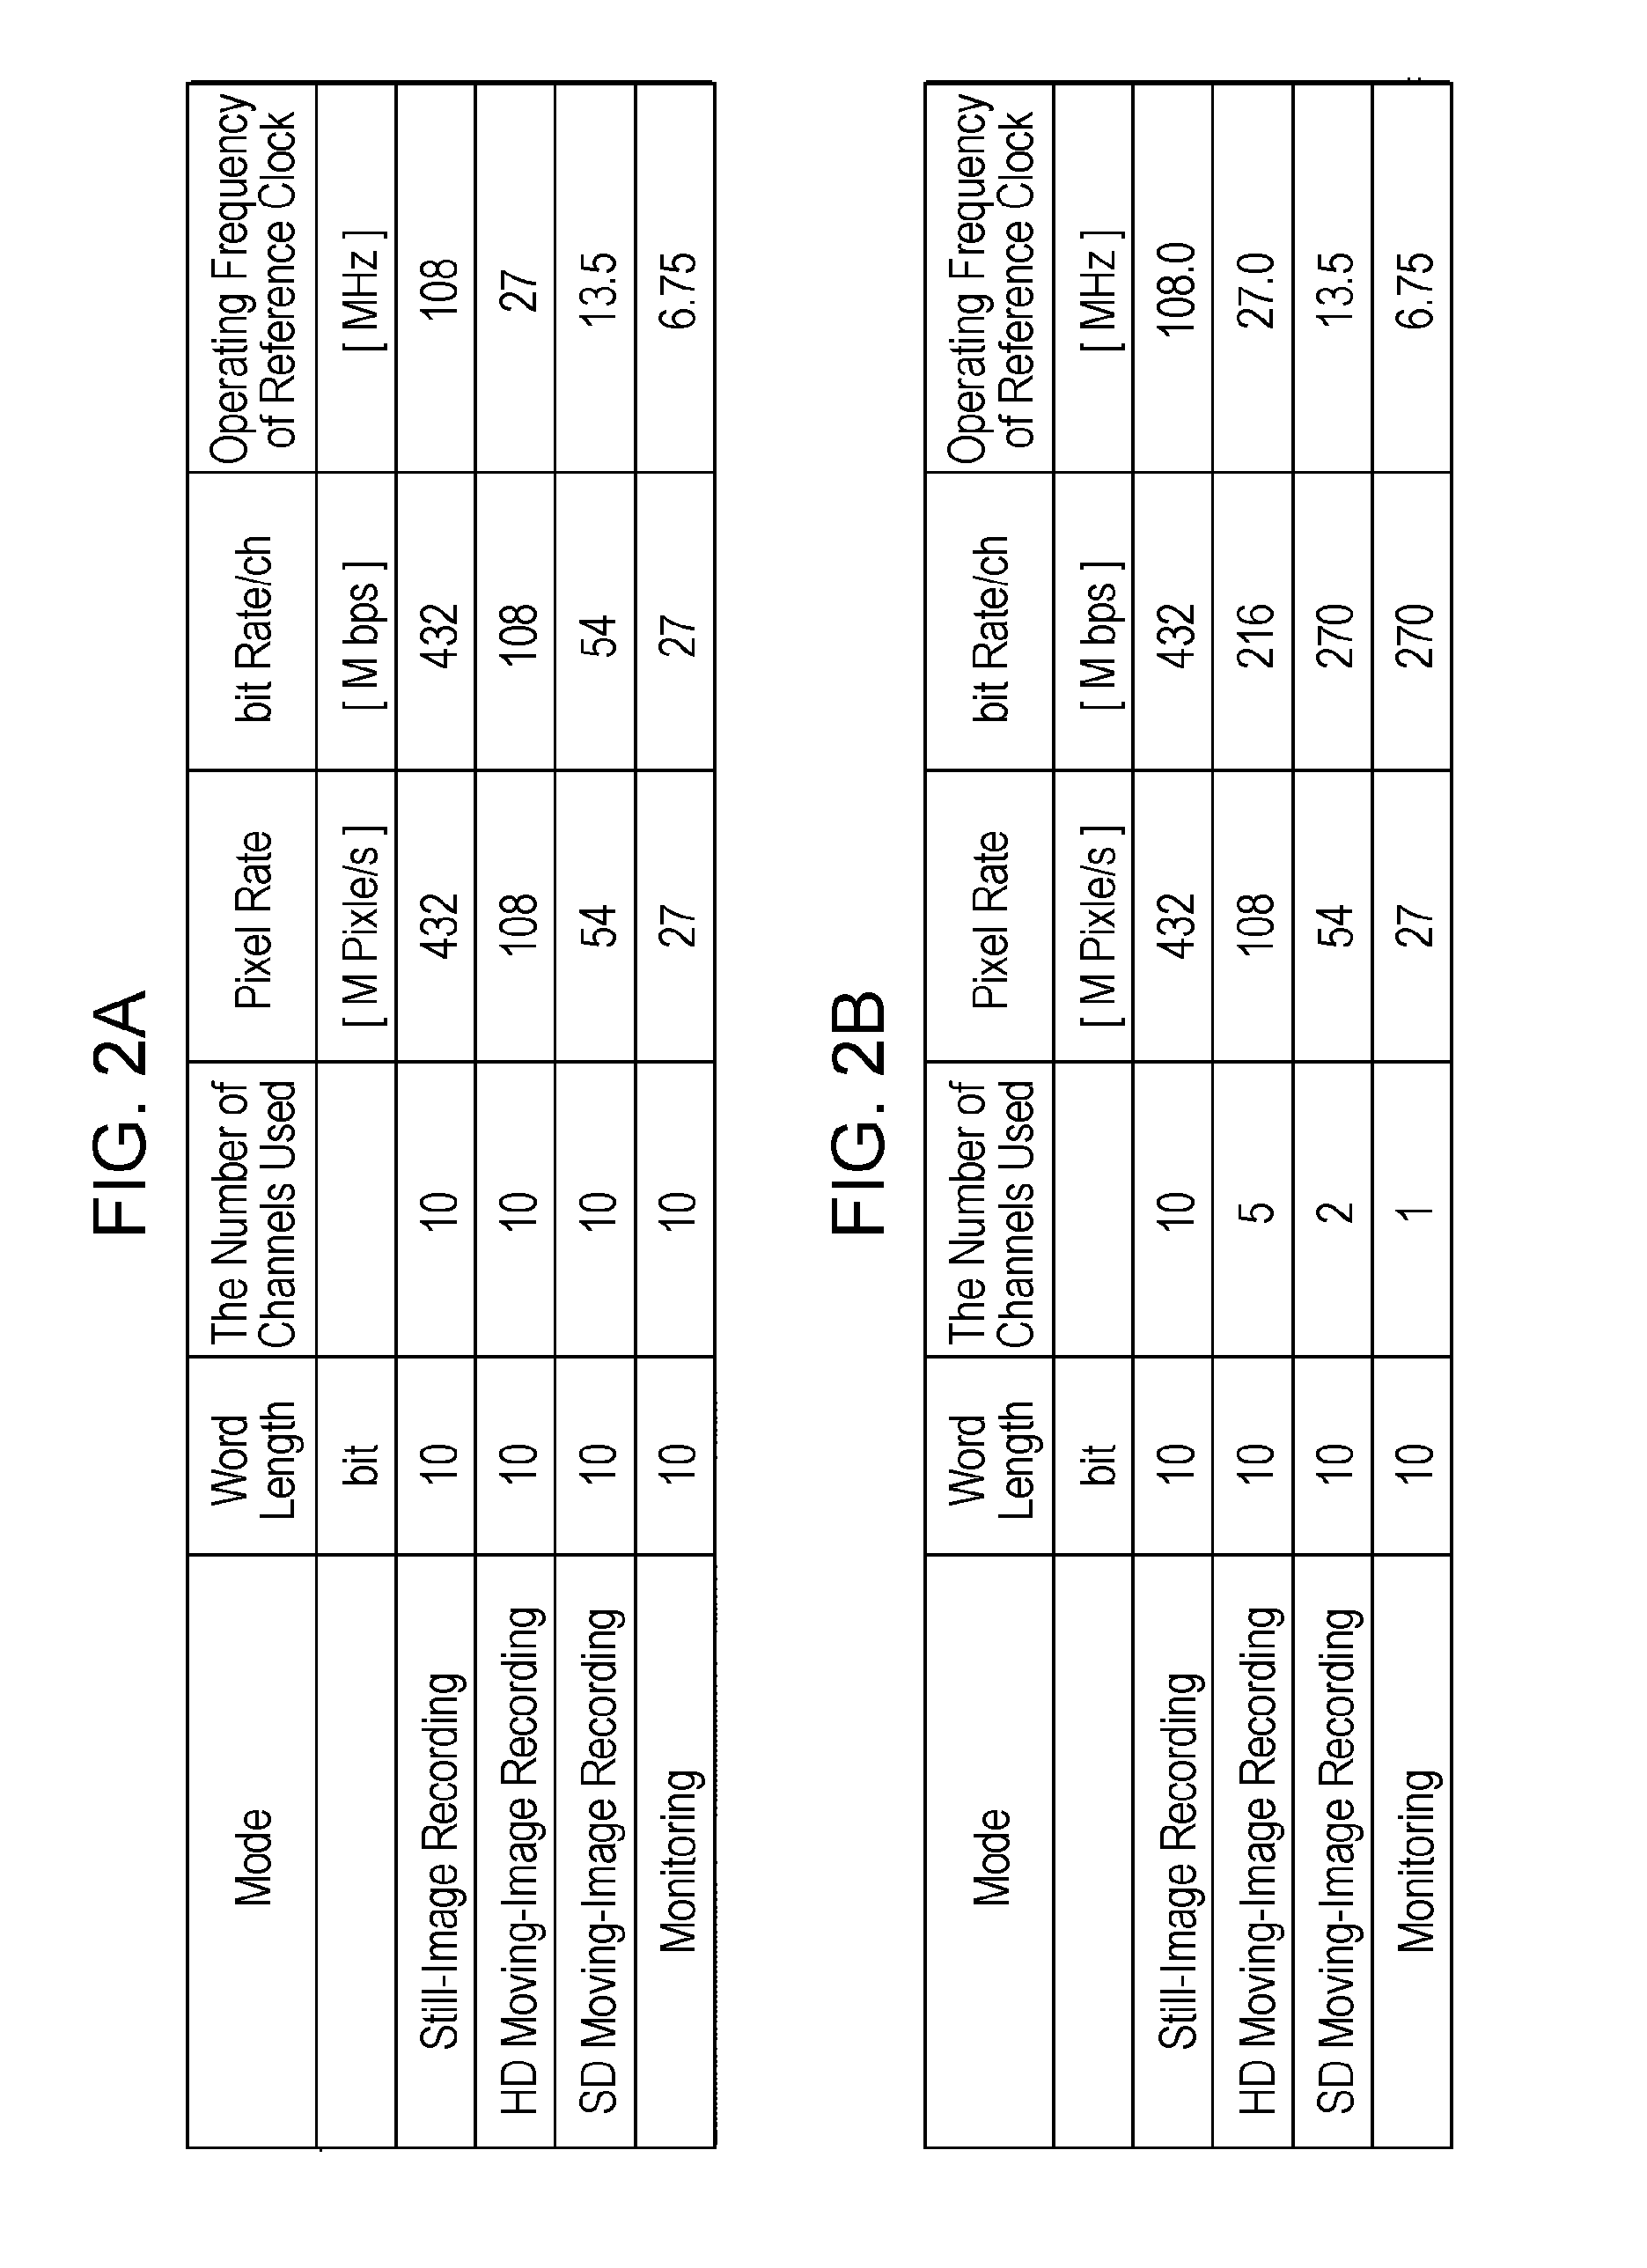 Solid-state image pick-up device, data transmission method, and image pickup apparatus